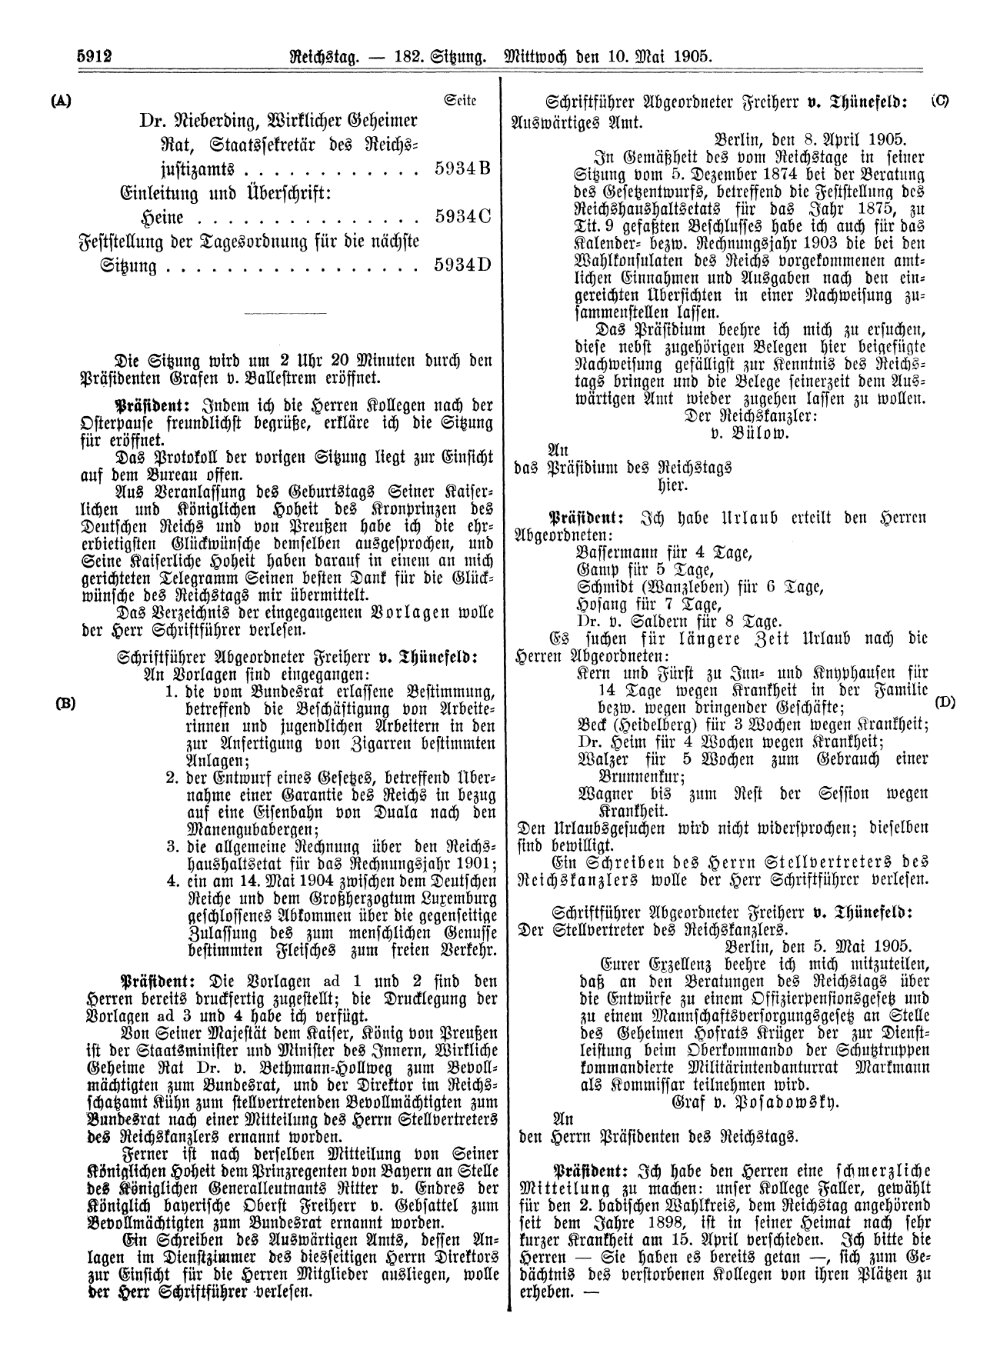 Scan of page 5912